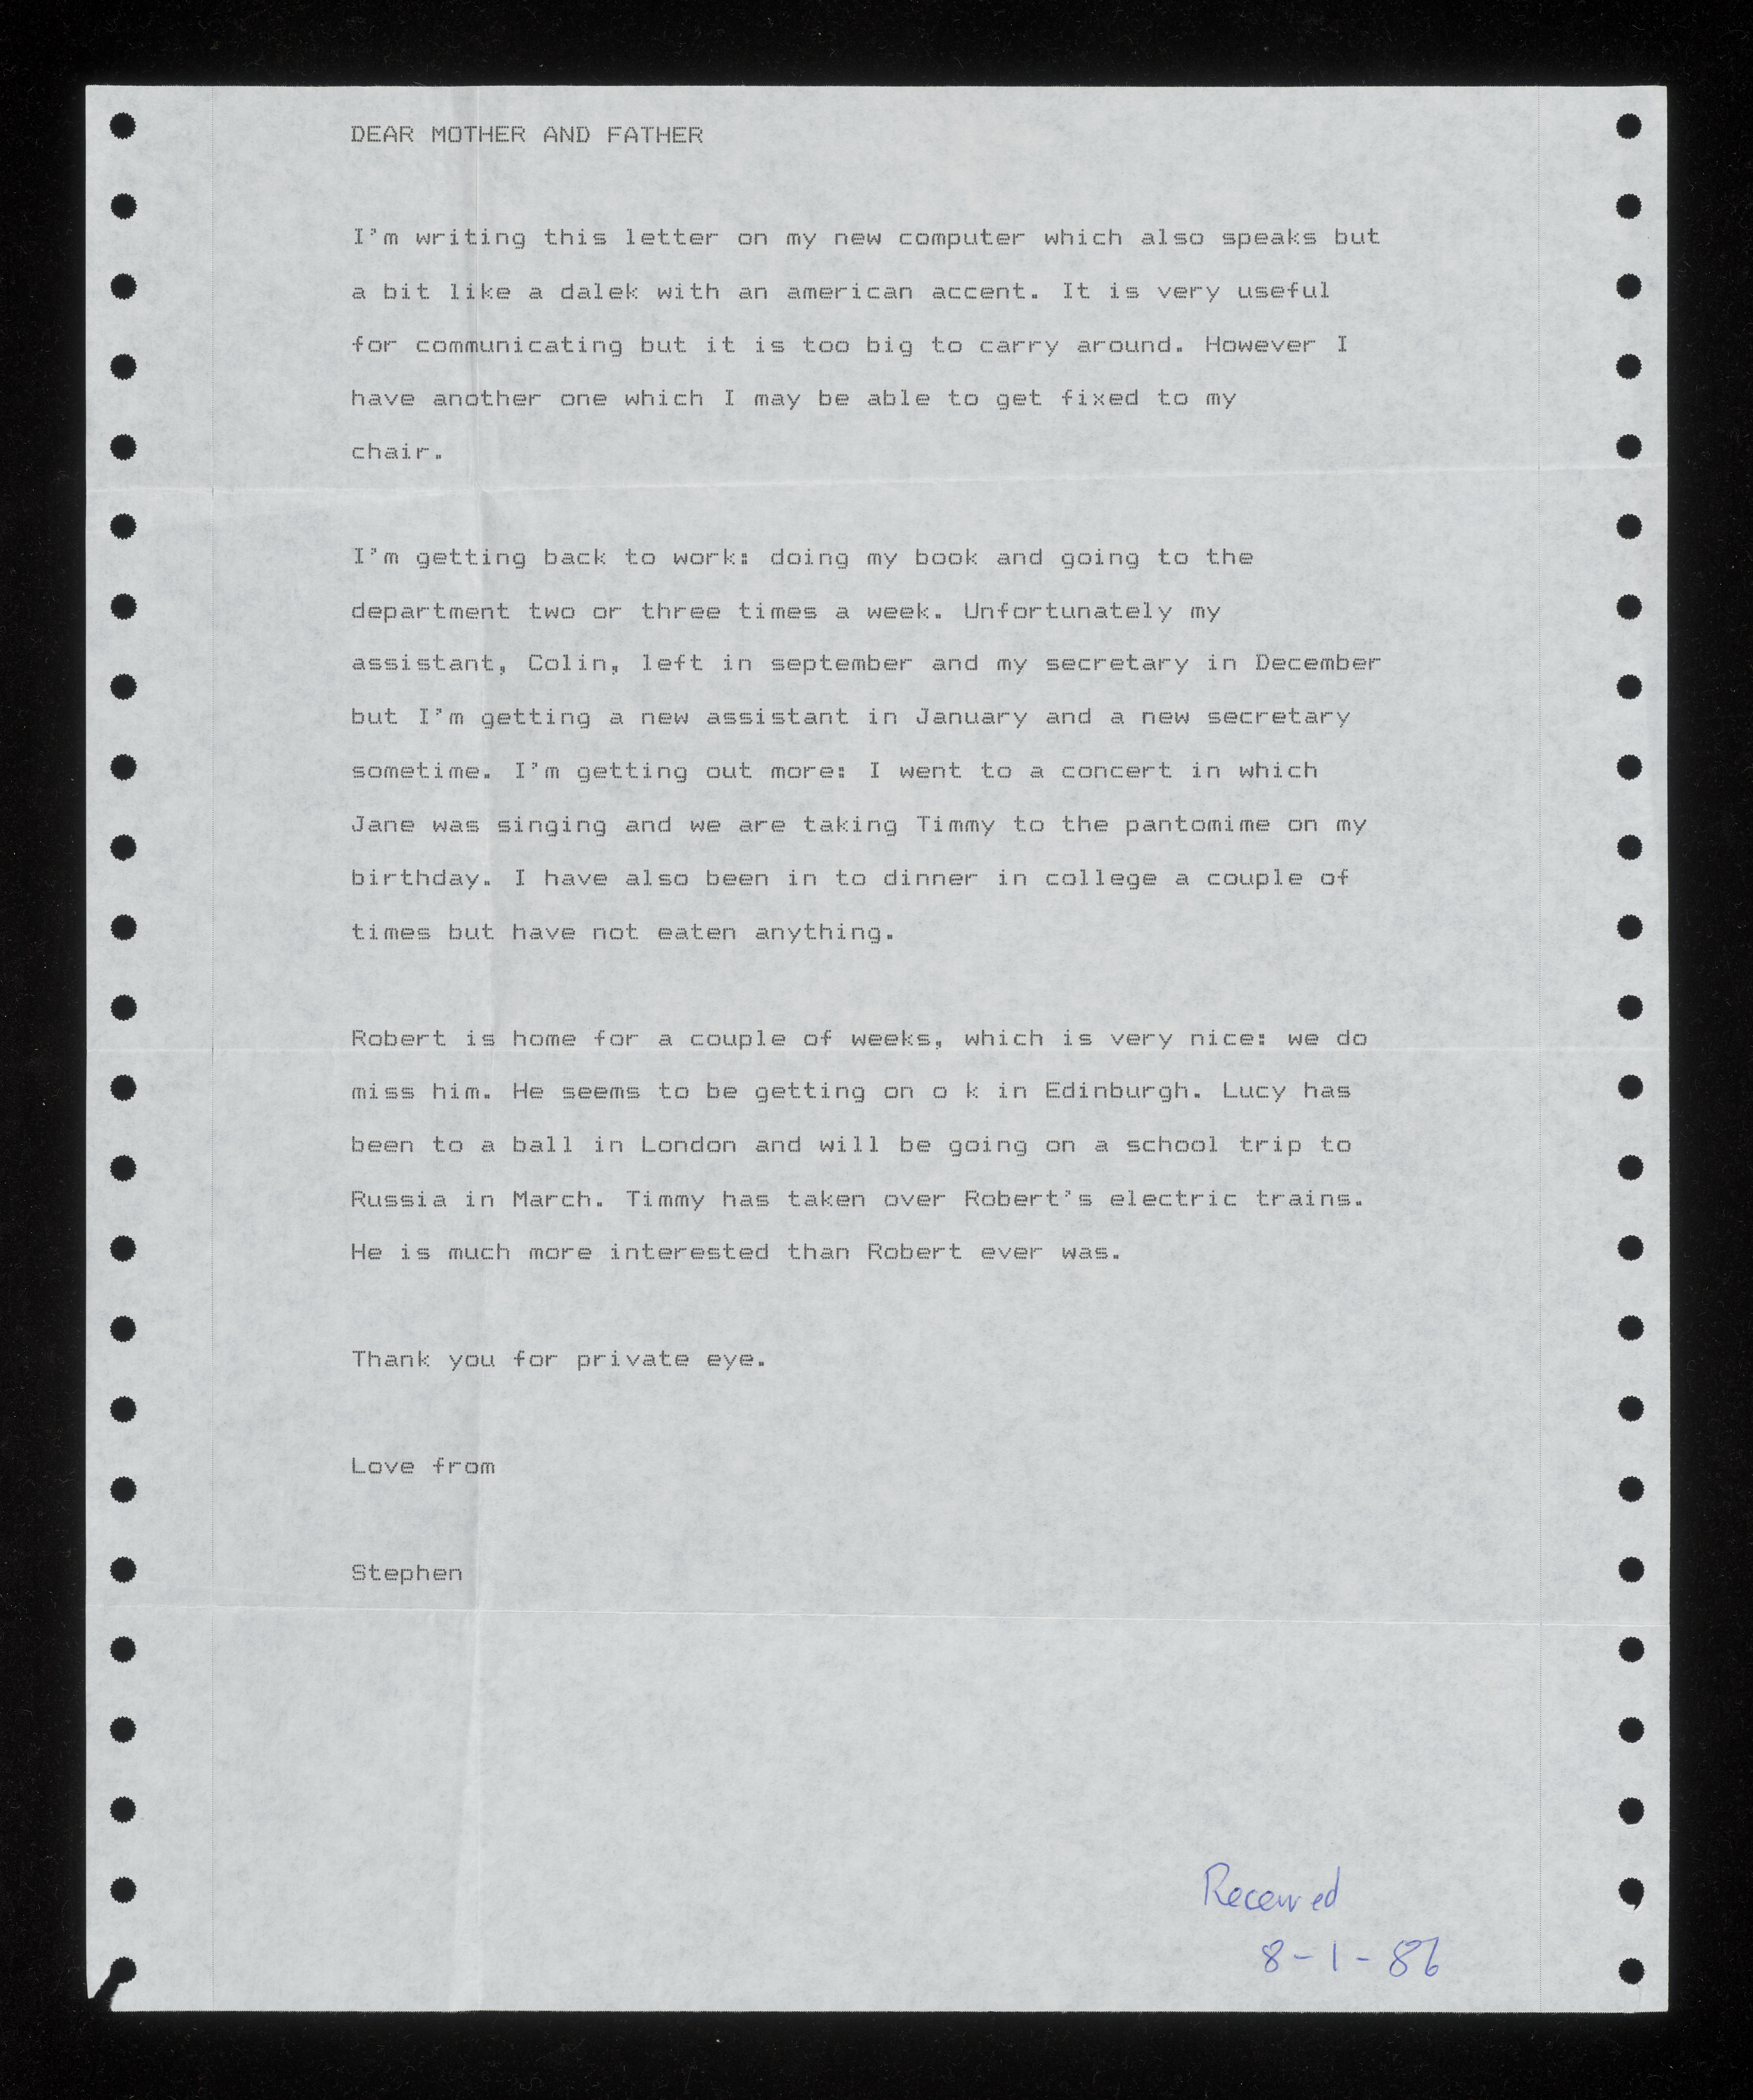 A typewritten letter from Stephen Hawking to his parents